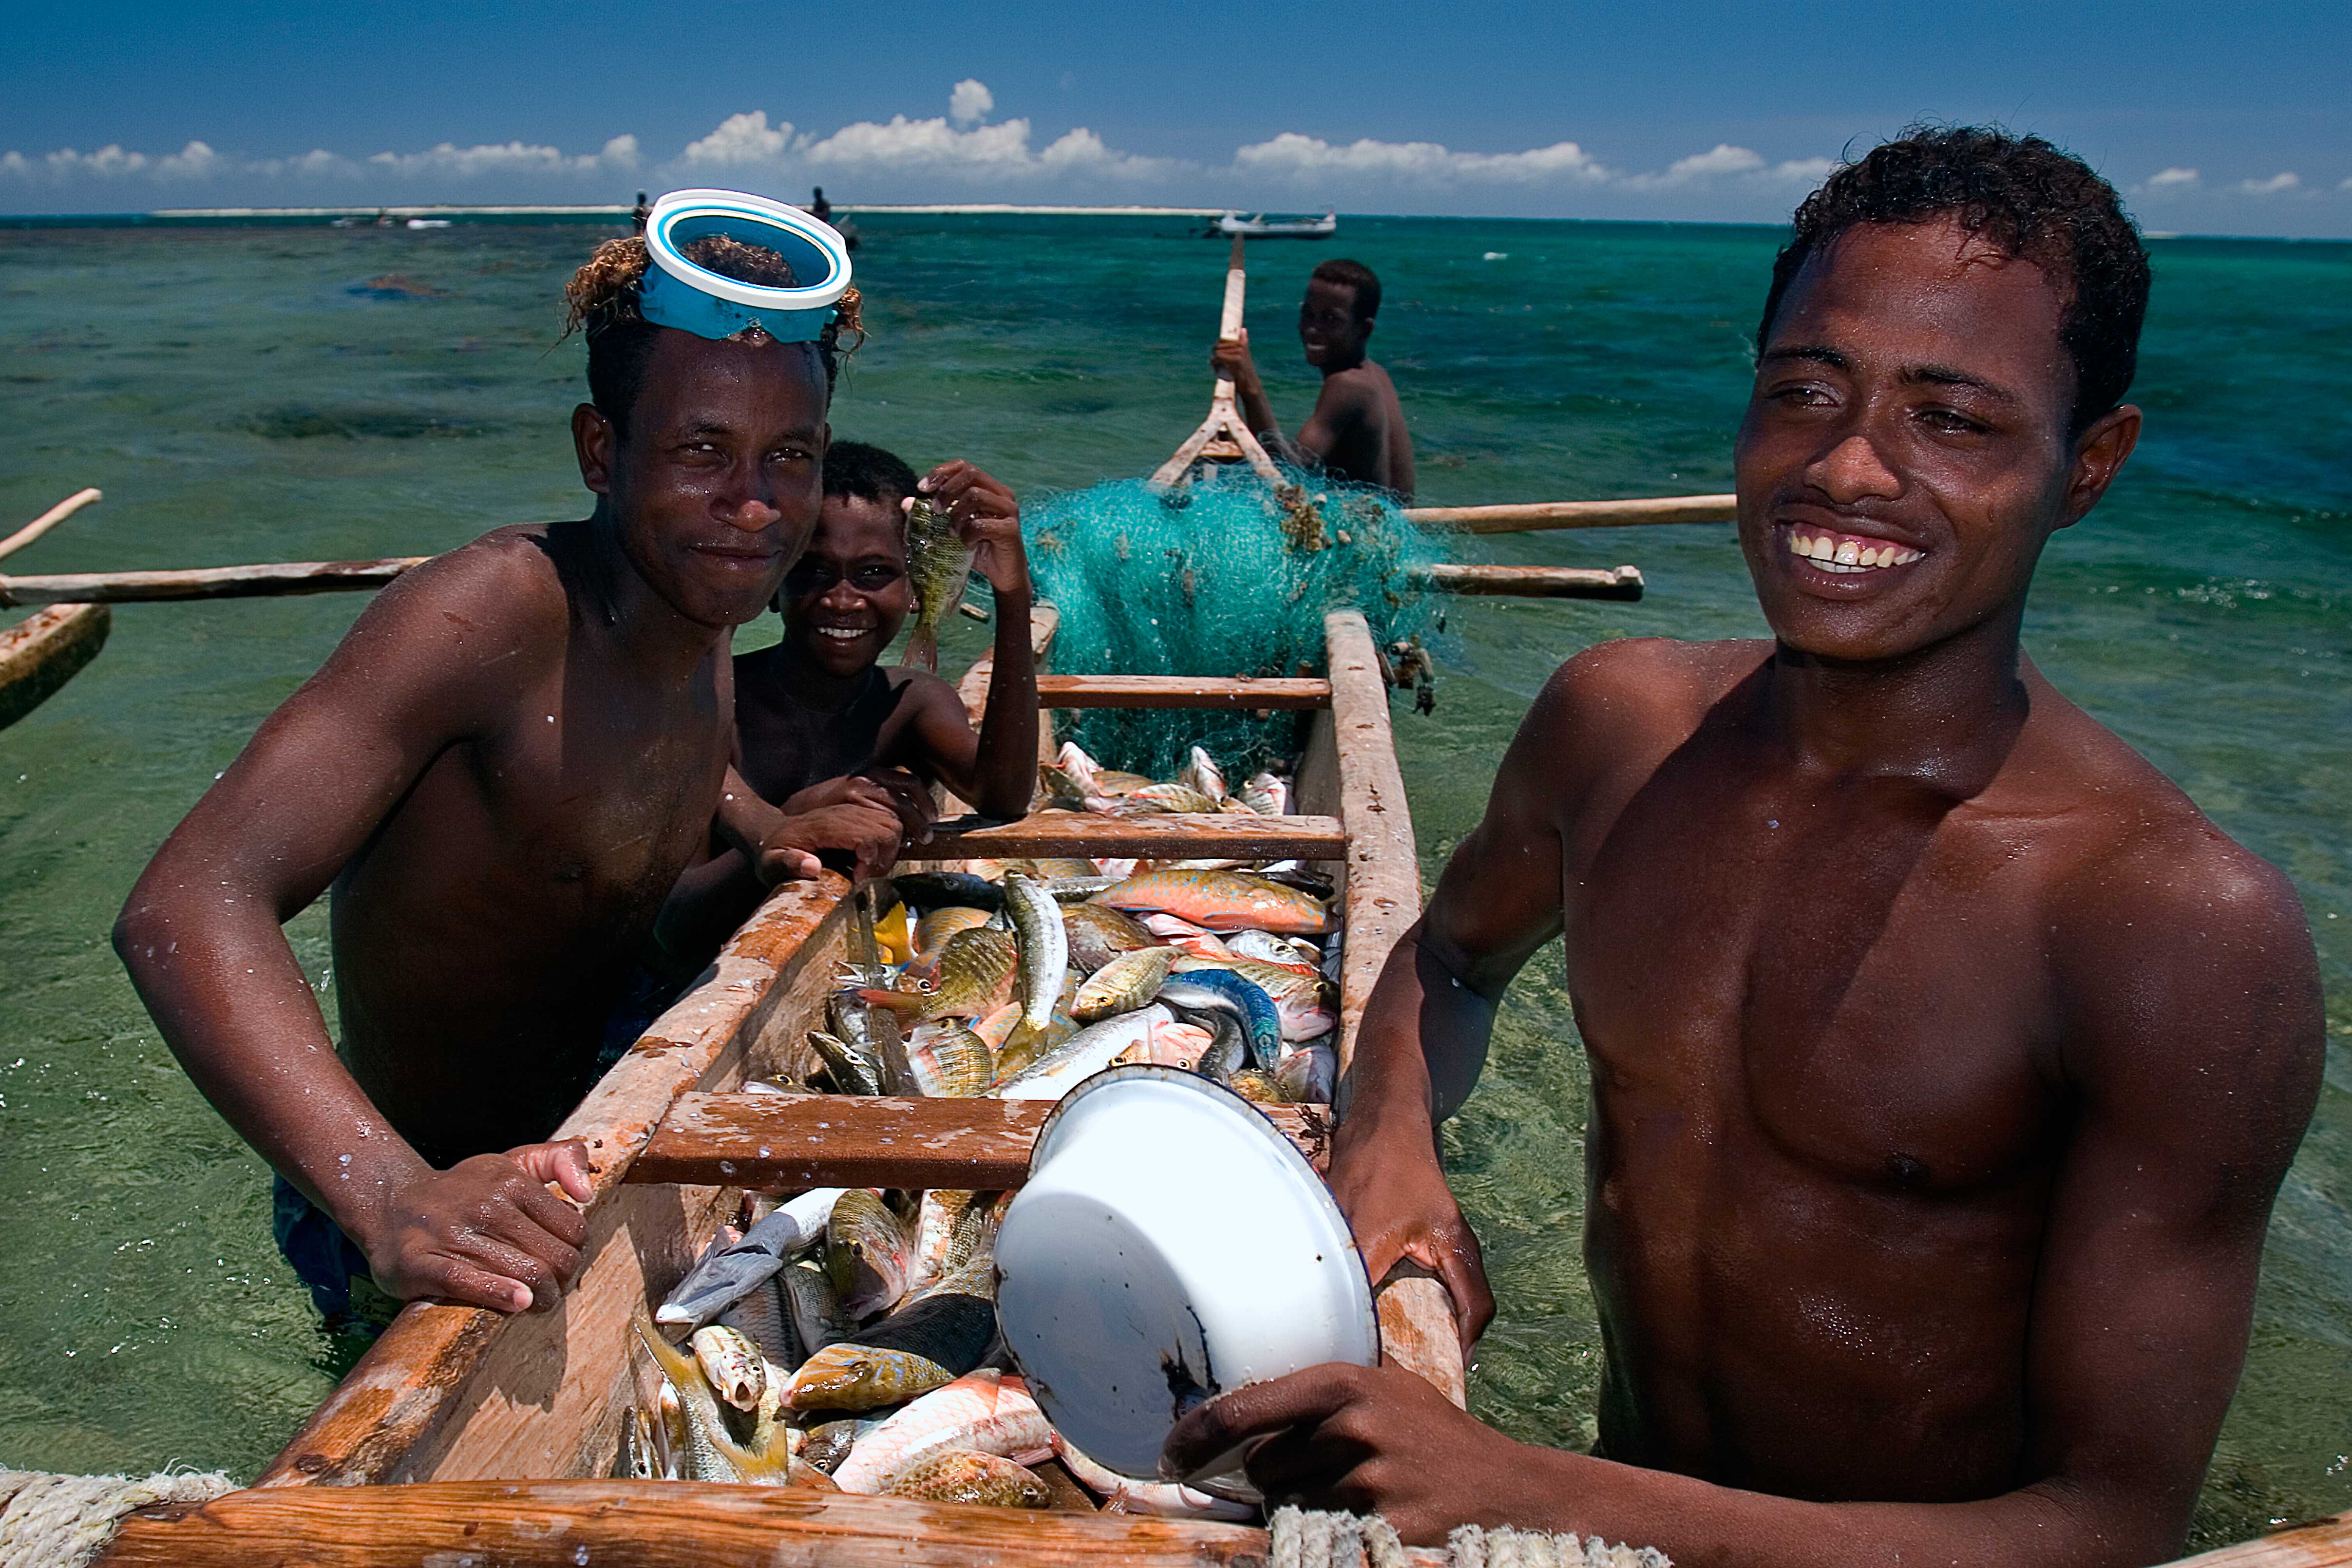 By making conservation work for people, Blue Ventures works to mobilize fishing communities to support marine protection. Photo: Garth Cripps